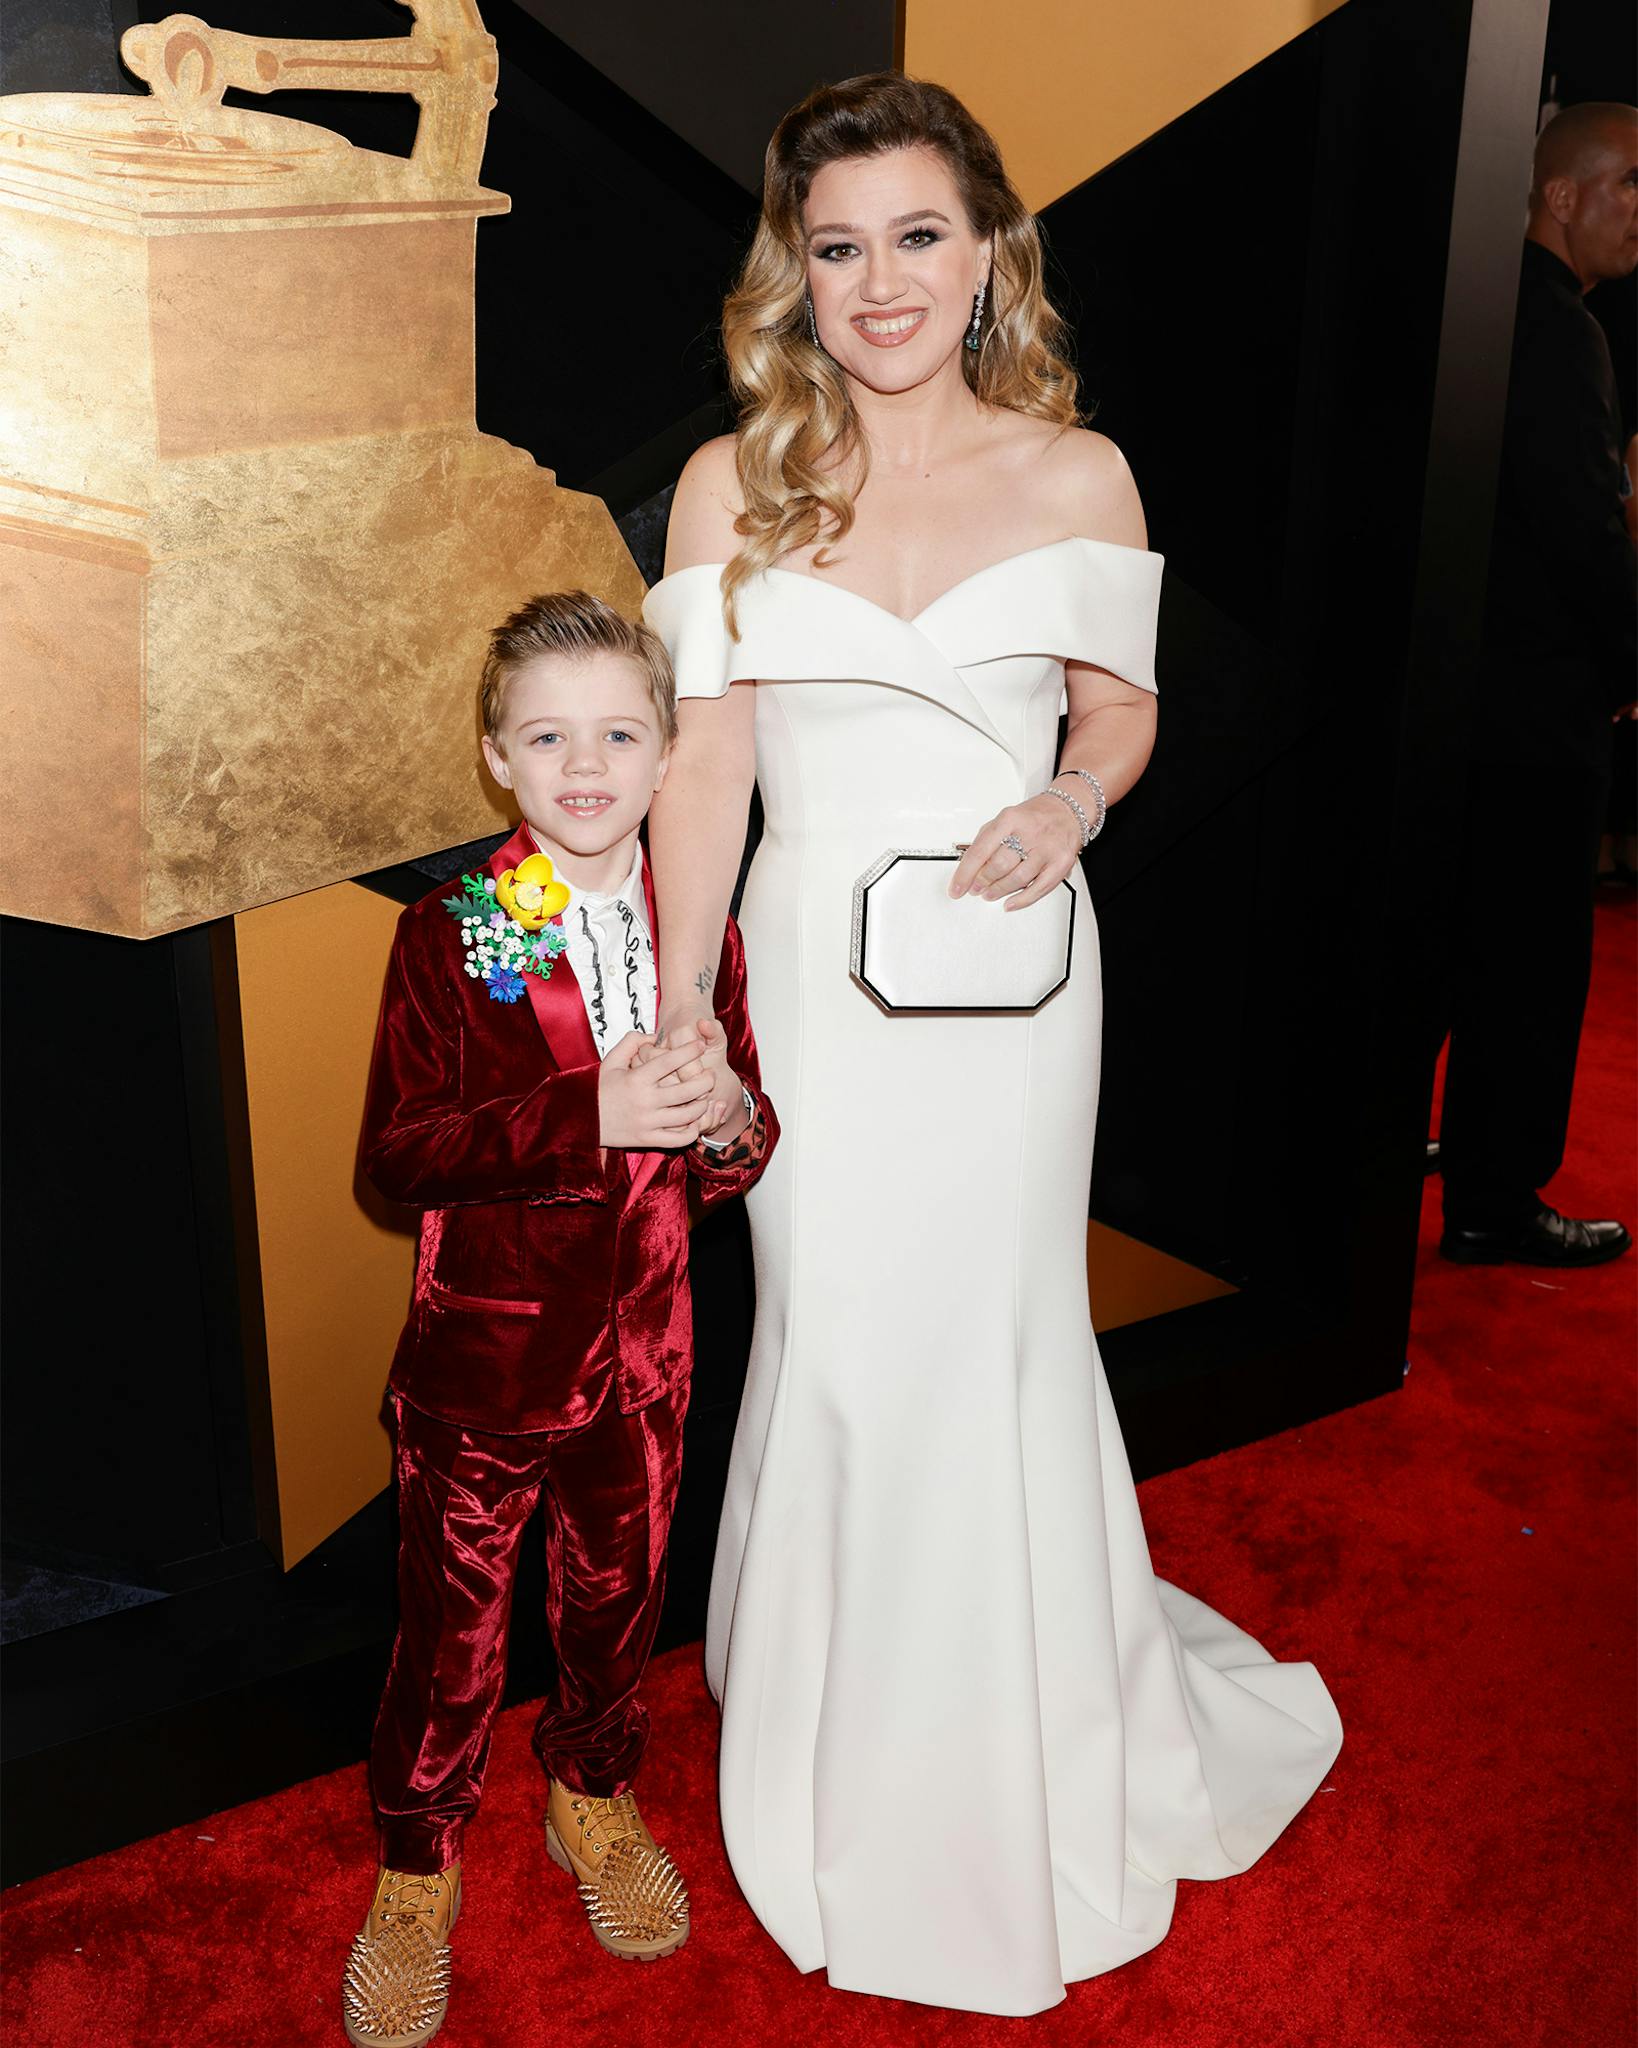 Nominated for best pop vocal album, Kelly Clarkson donned her winners white in an off-the-shoulder classy gown. Although she didn’t win, the star looked content cheering on nominees alongside her son. 